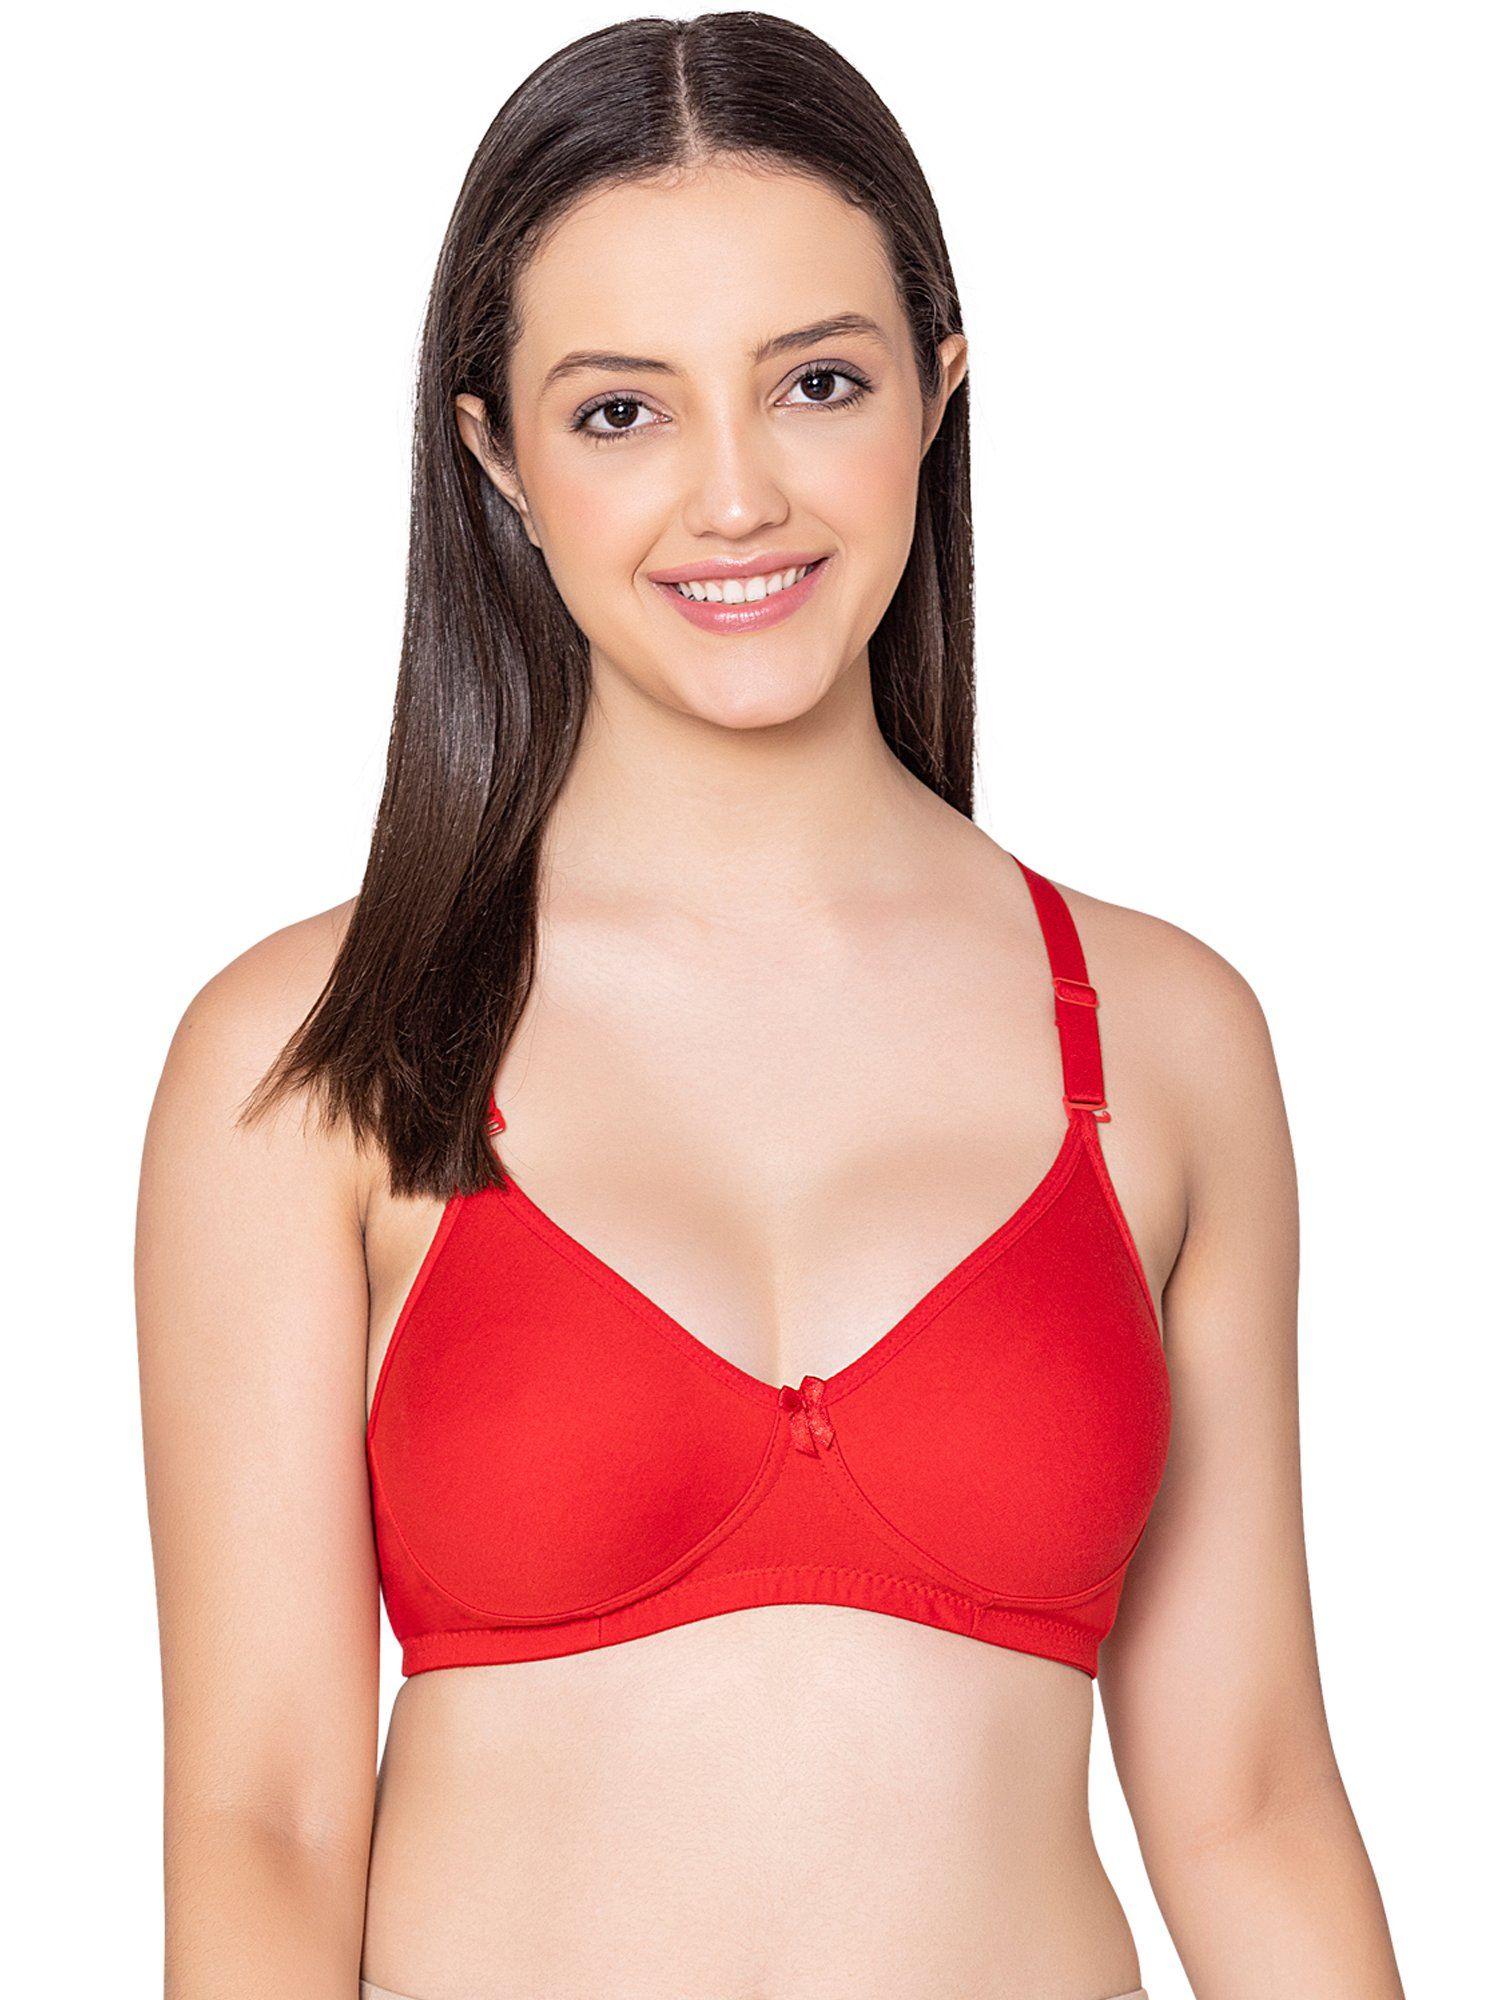 polycotton red color bra 6594red